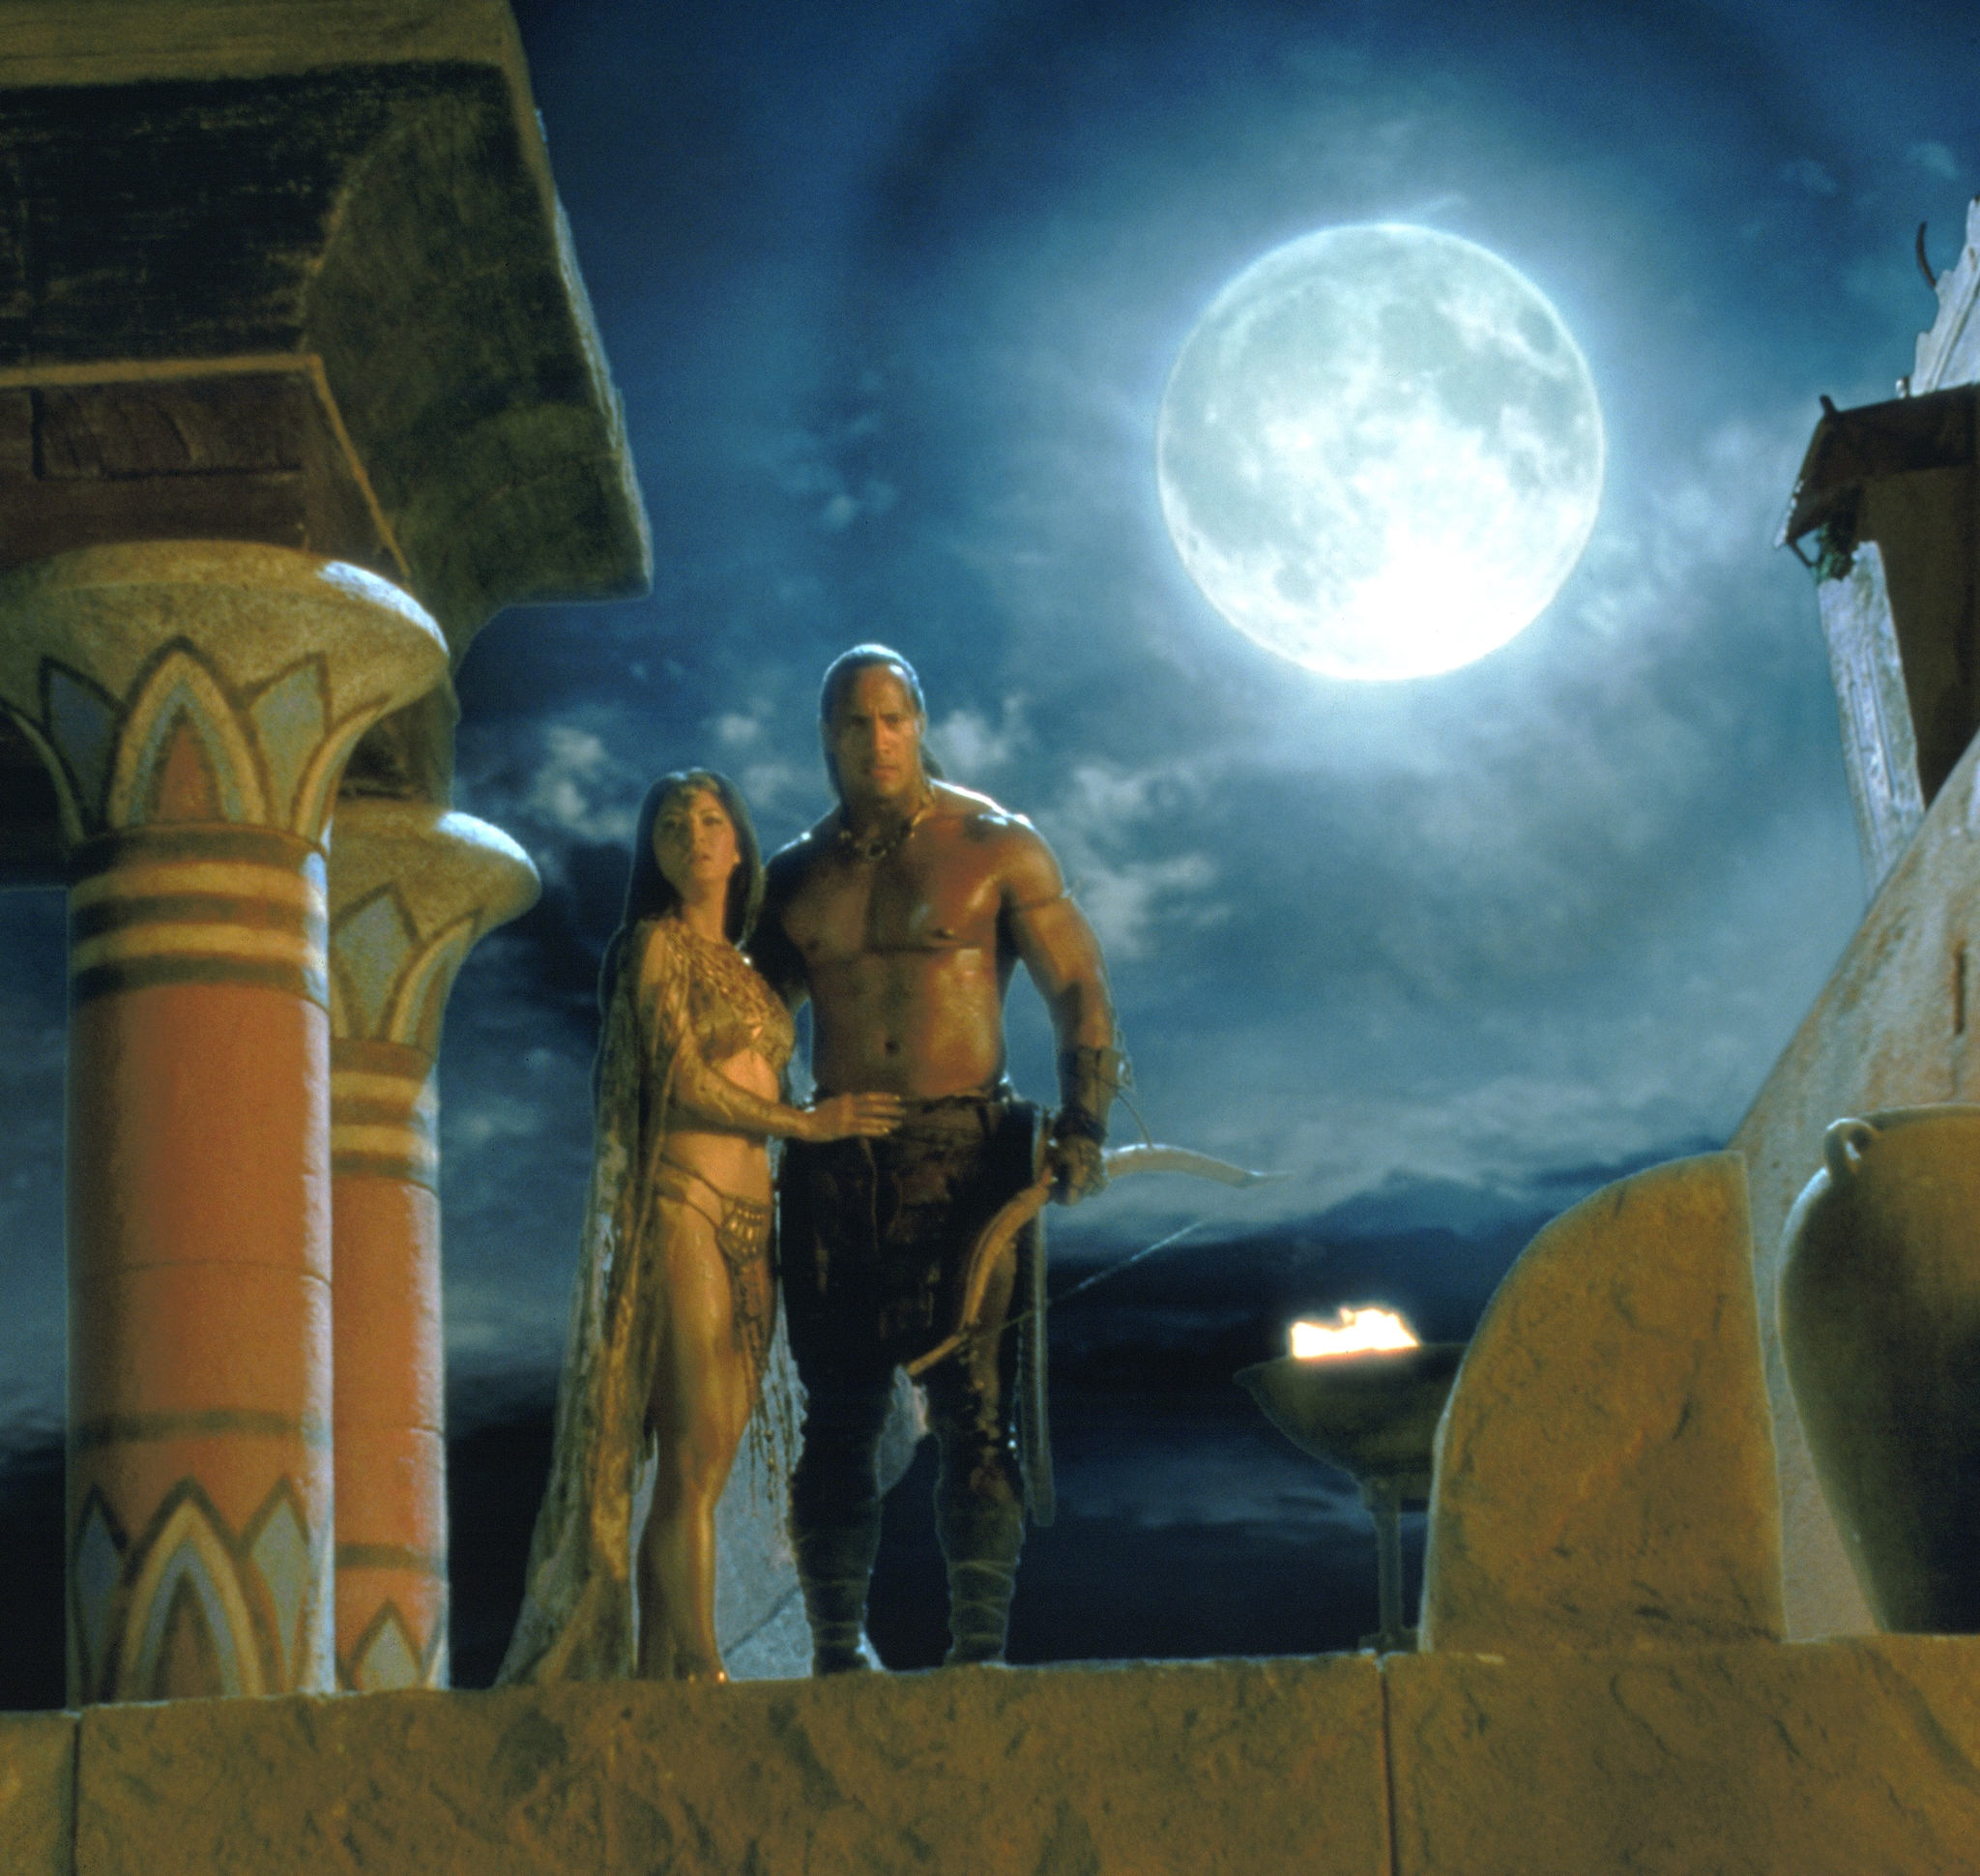 Kelly Hu and Dwayne Johnson in The Scorpion King (2002)